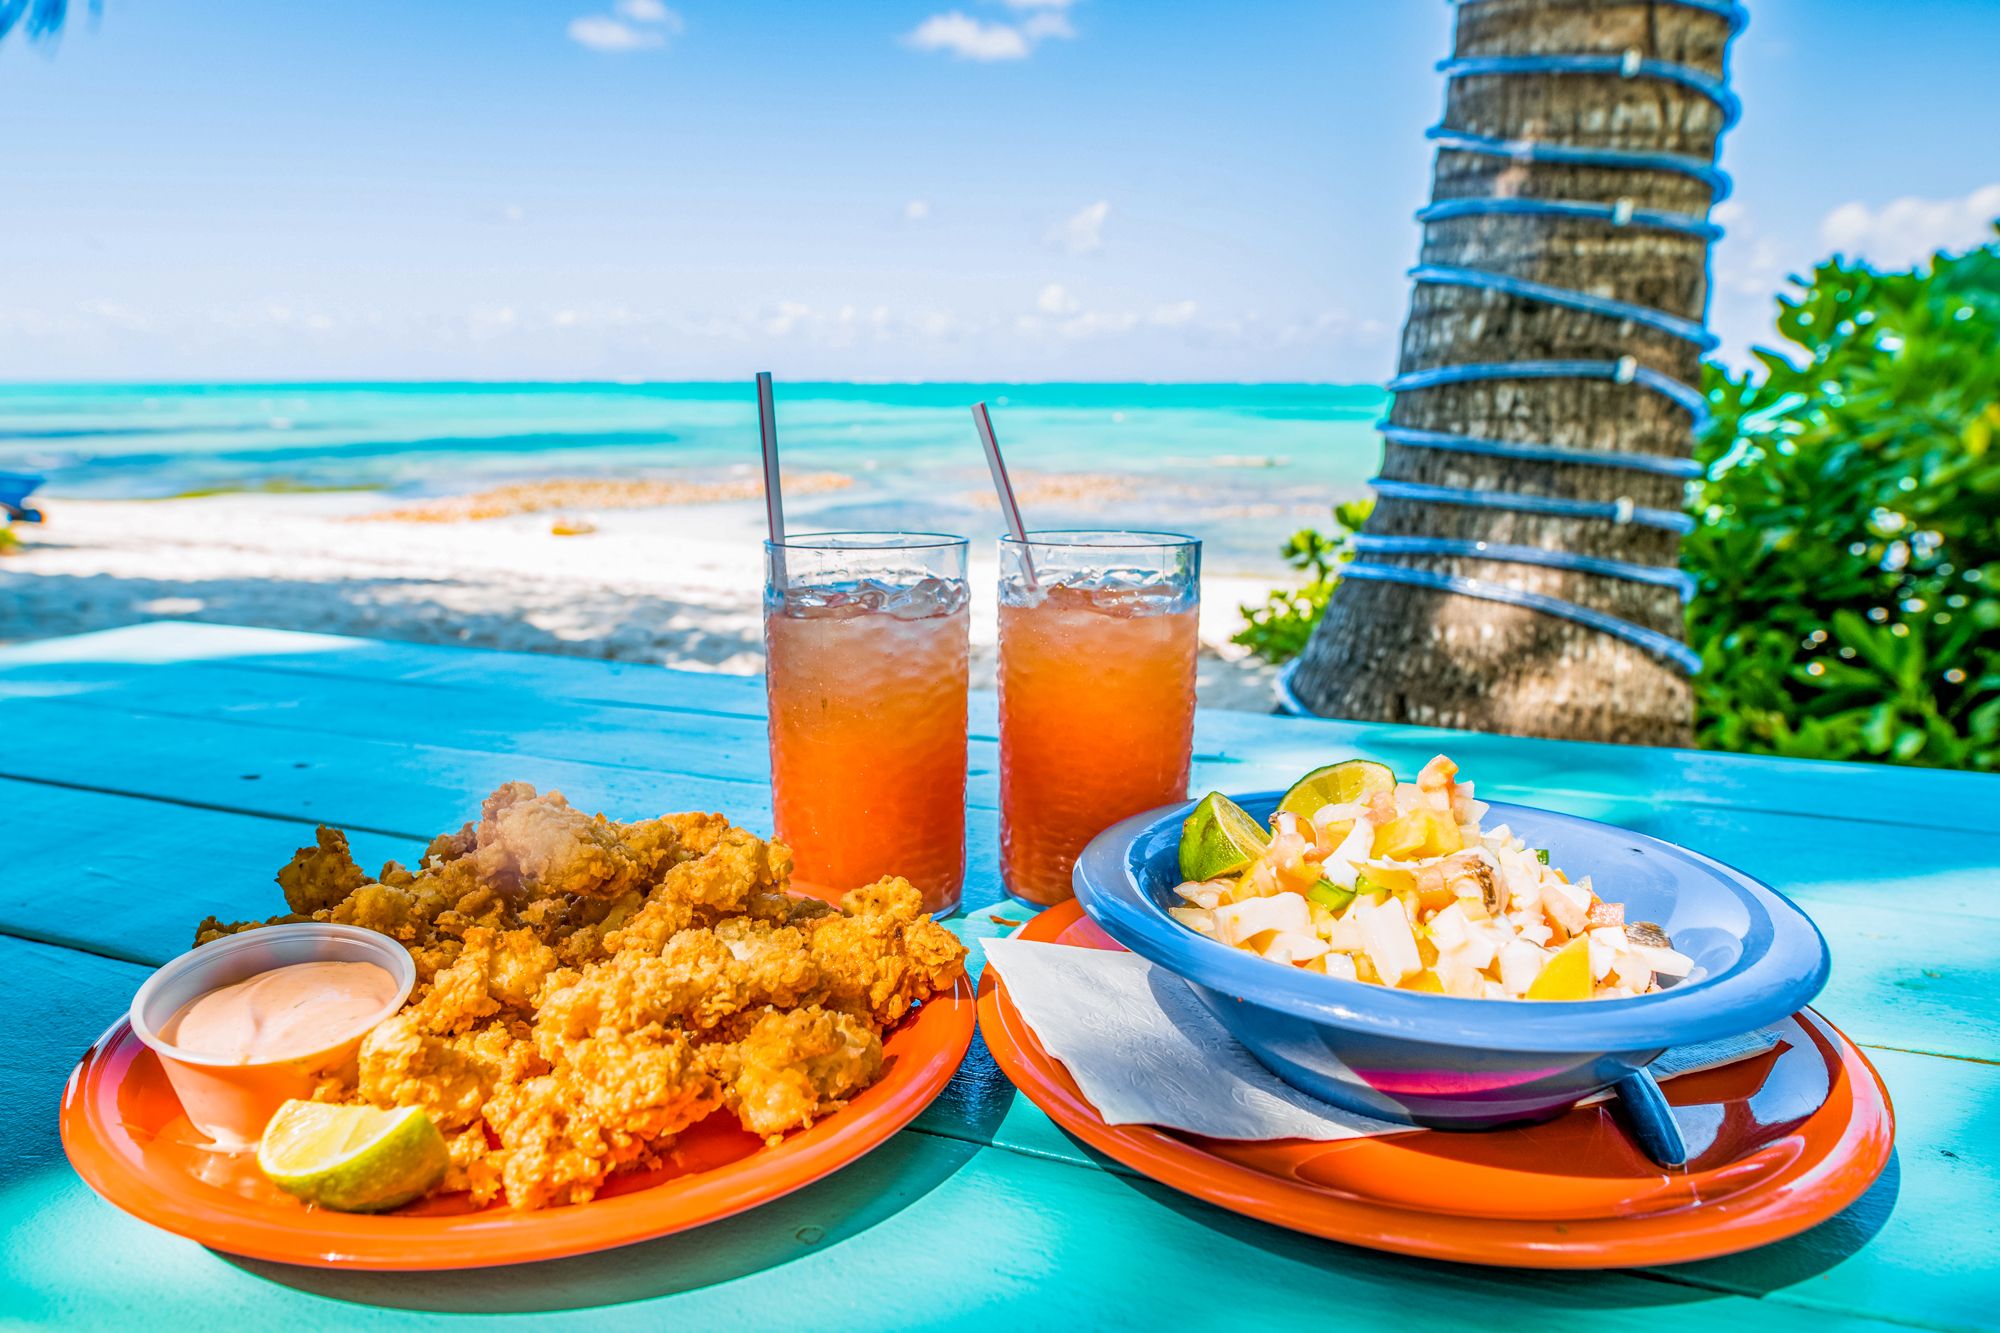 Conch fritters conch salad Bahamas